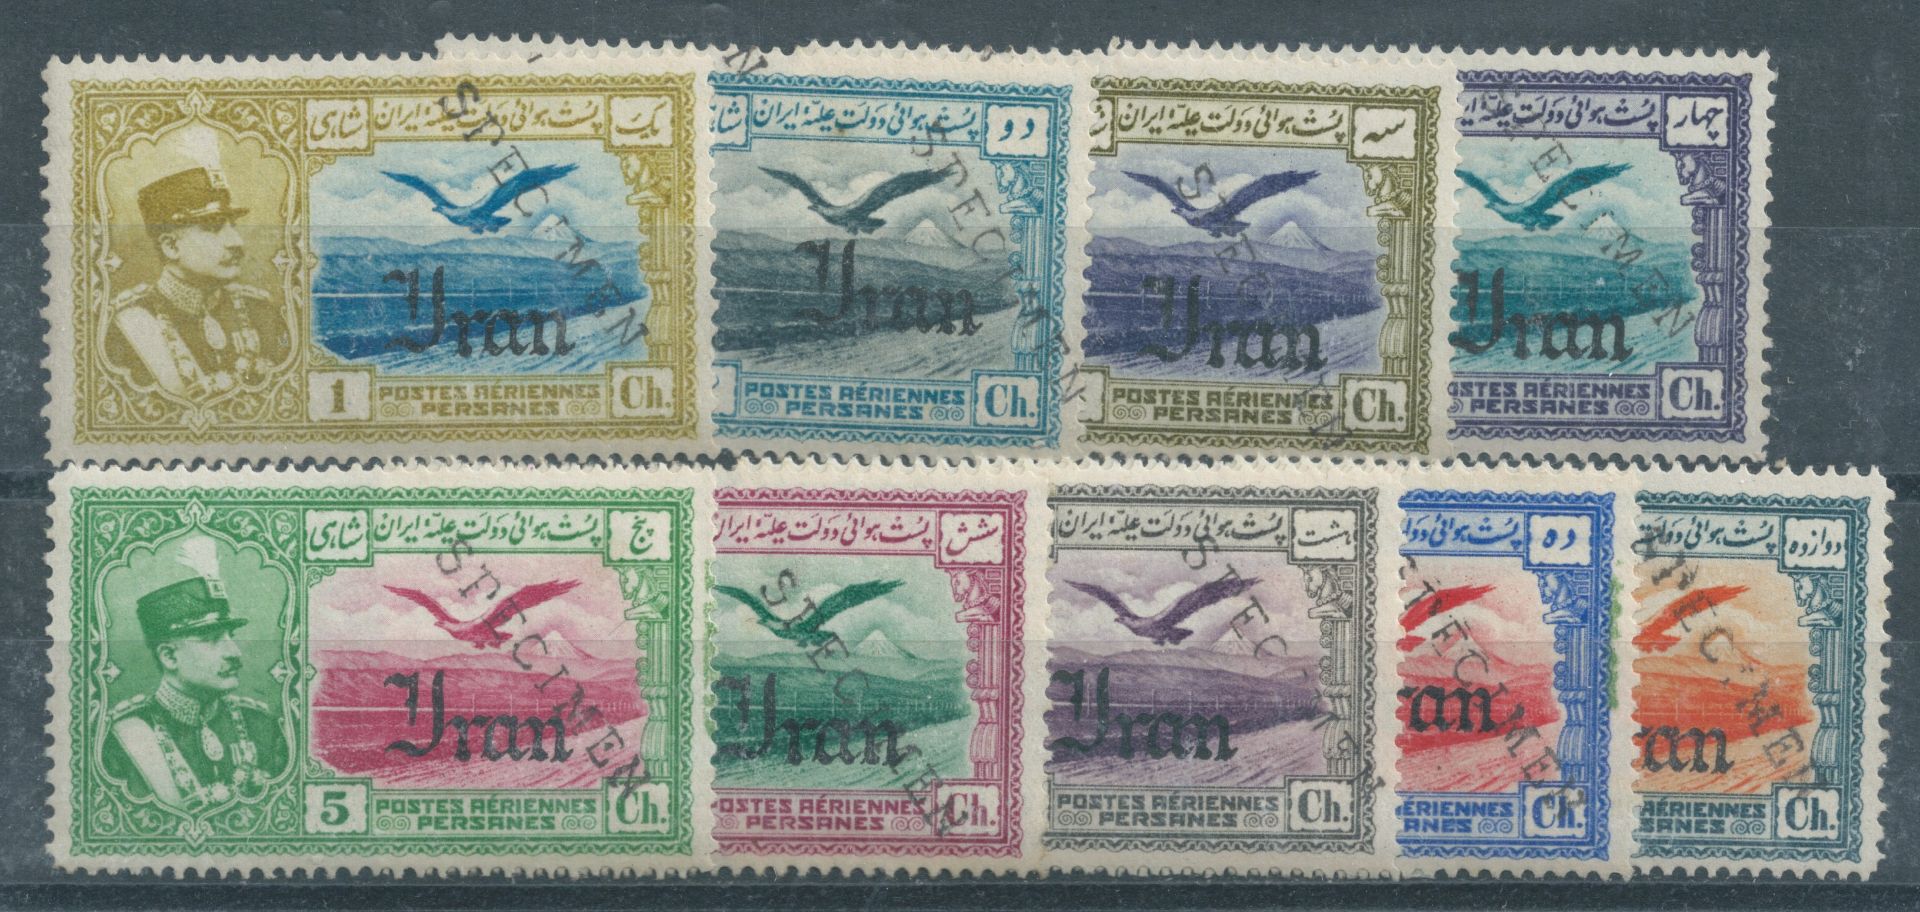 Persia 1935 Airs 1ch ro 3To, S.G. 770/786, distributed through the U.P.U. as Specimen stamps